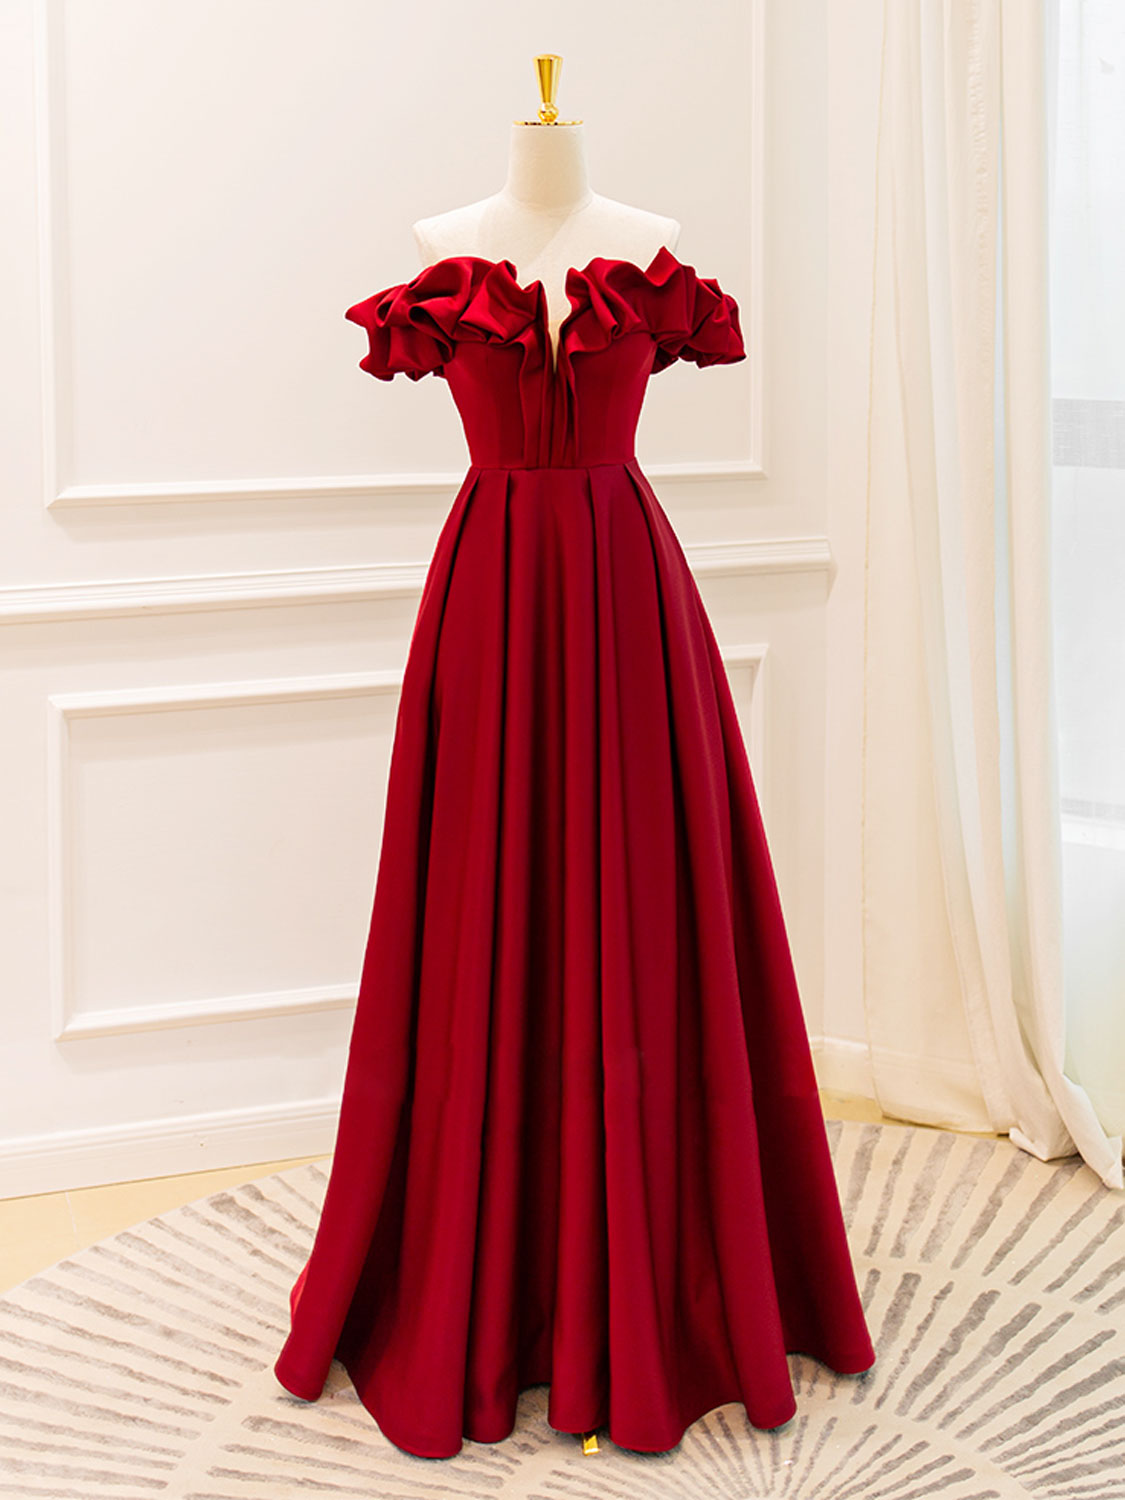 Strapless Off the Shoulder A-line Red Formal Party Dress Evening Dress - DollyGown